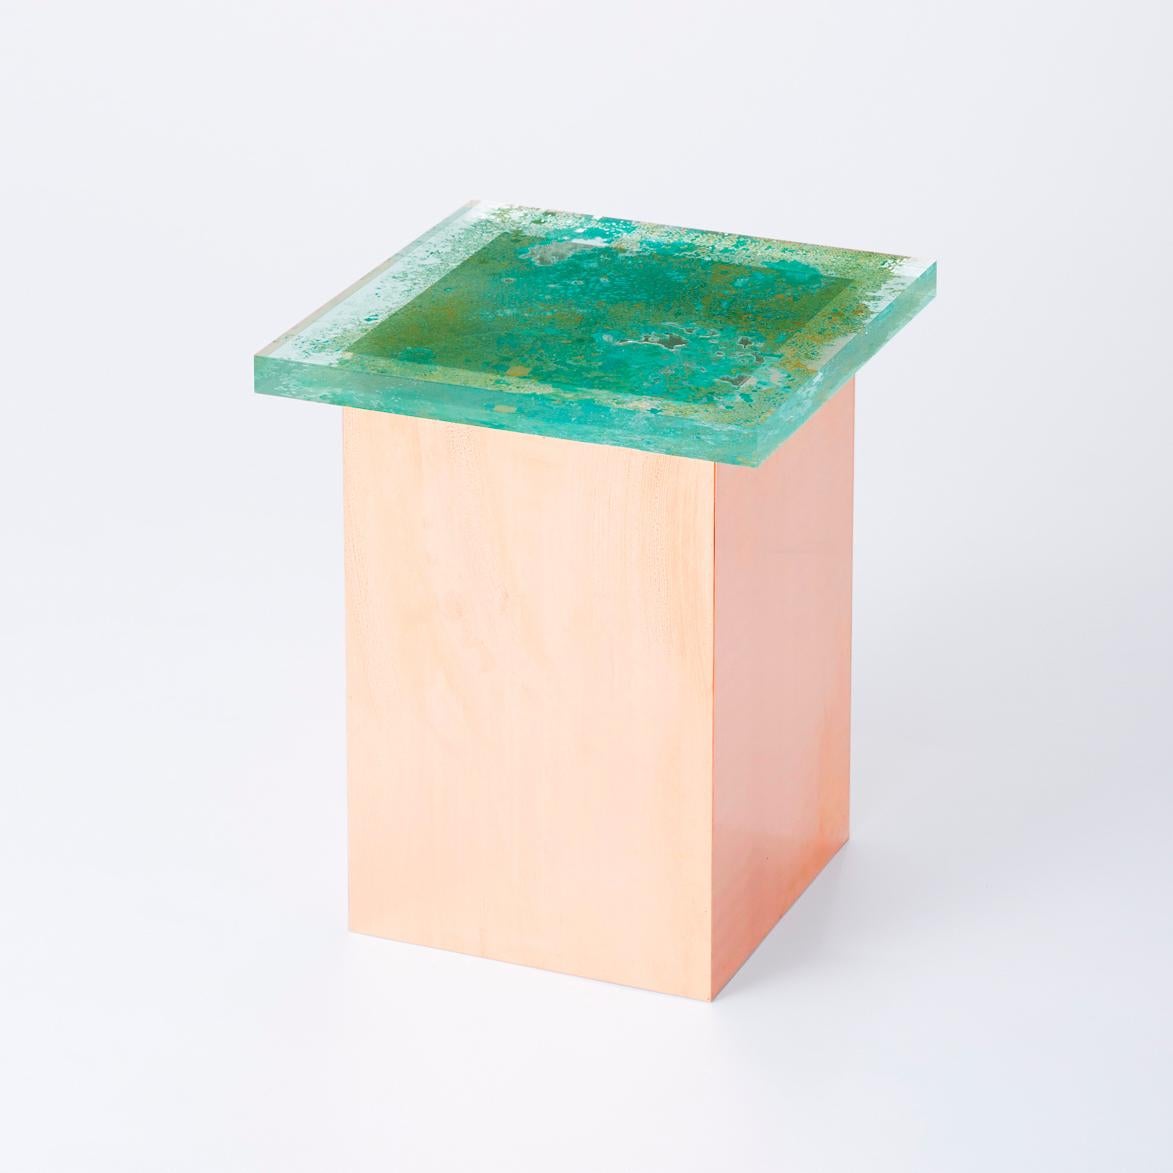 Stool designed by Yuma Kano.
Green colored materials are acrylic. This acrylic is what rust was transformed. Artist calls it 